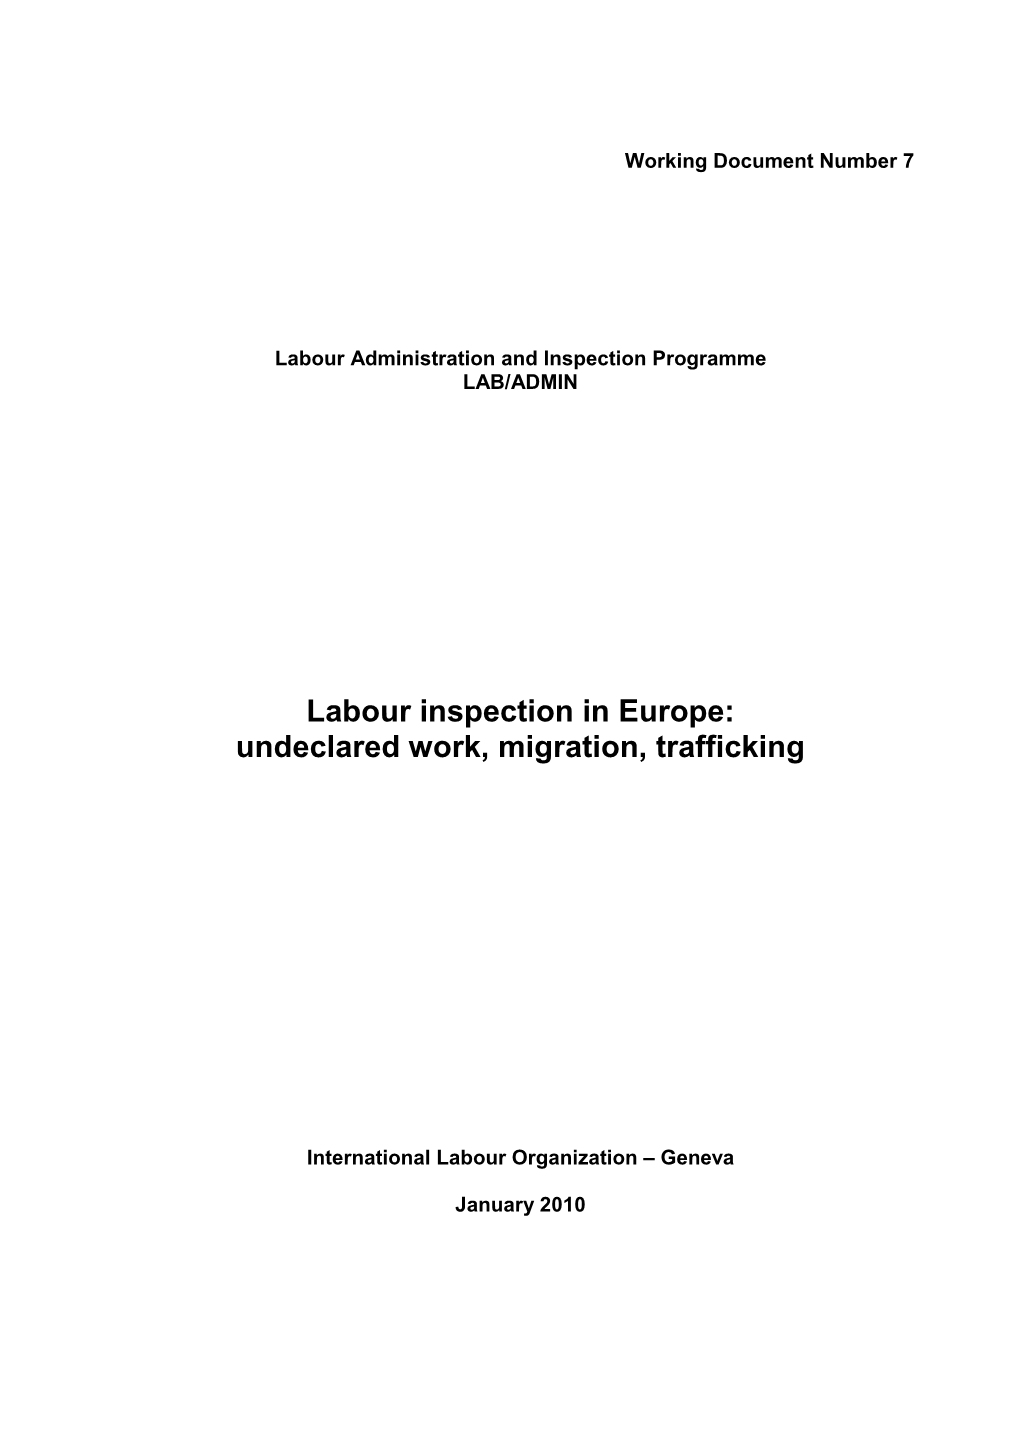 Labour Inspection in Europe: Undeclared Work, Migration, Trafficking